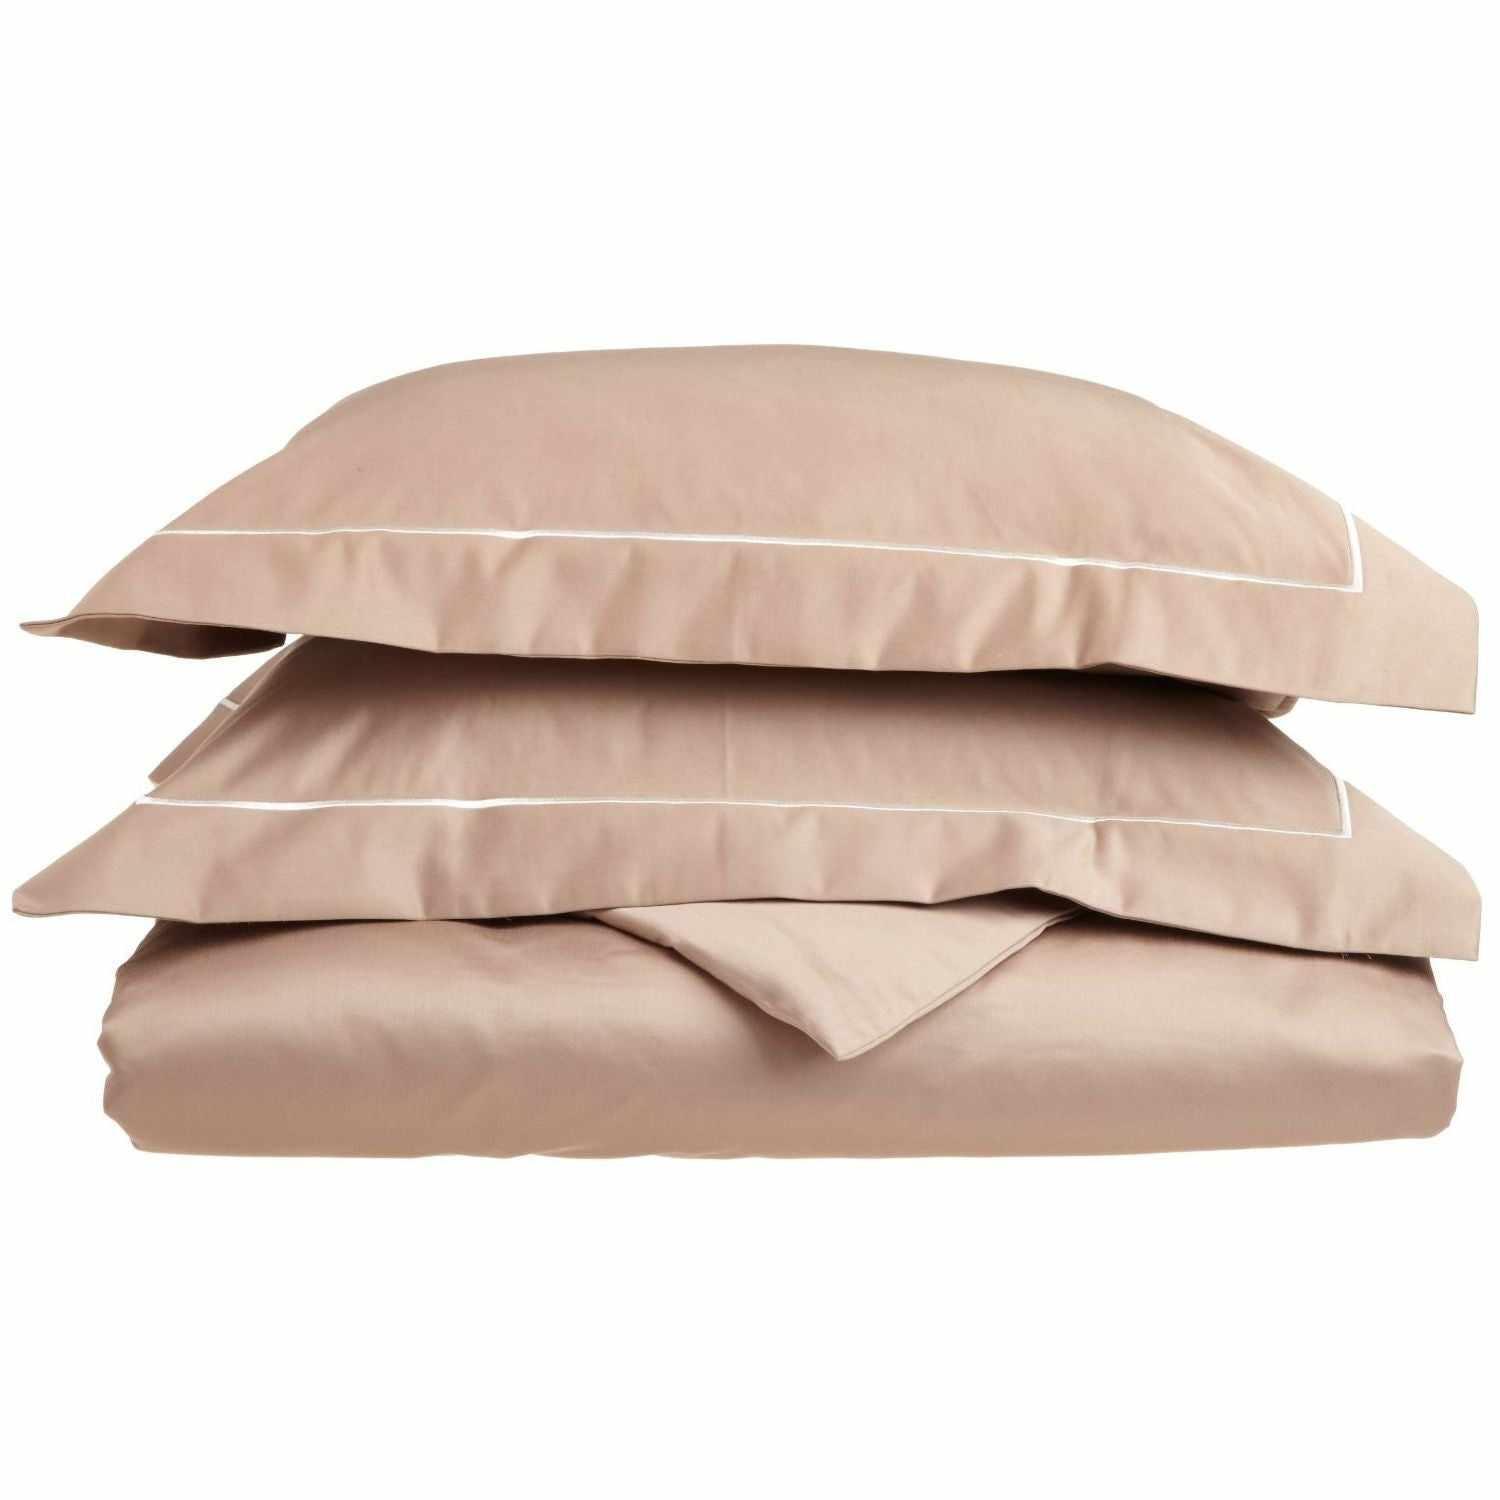  Superior Embroidered Egyptian Cotton Duvet Cover Set - Taupe/Ivory